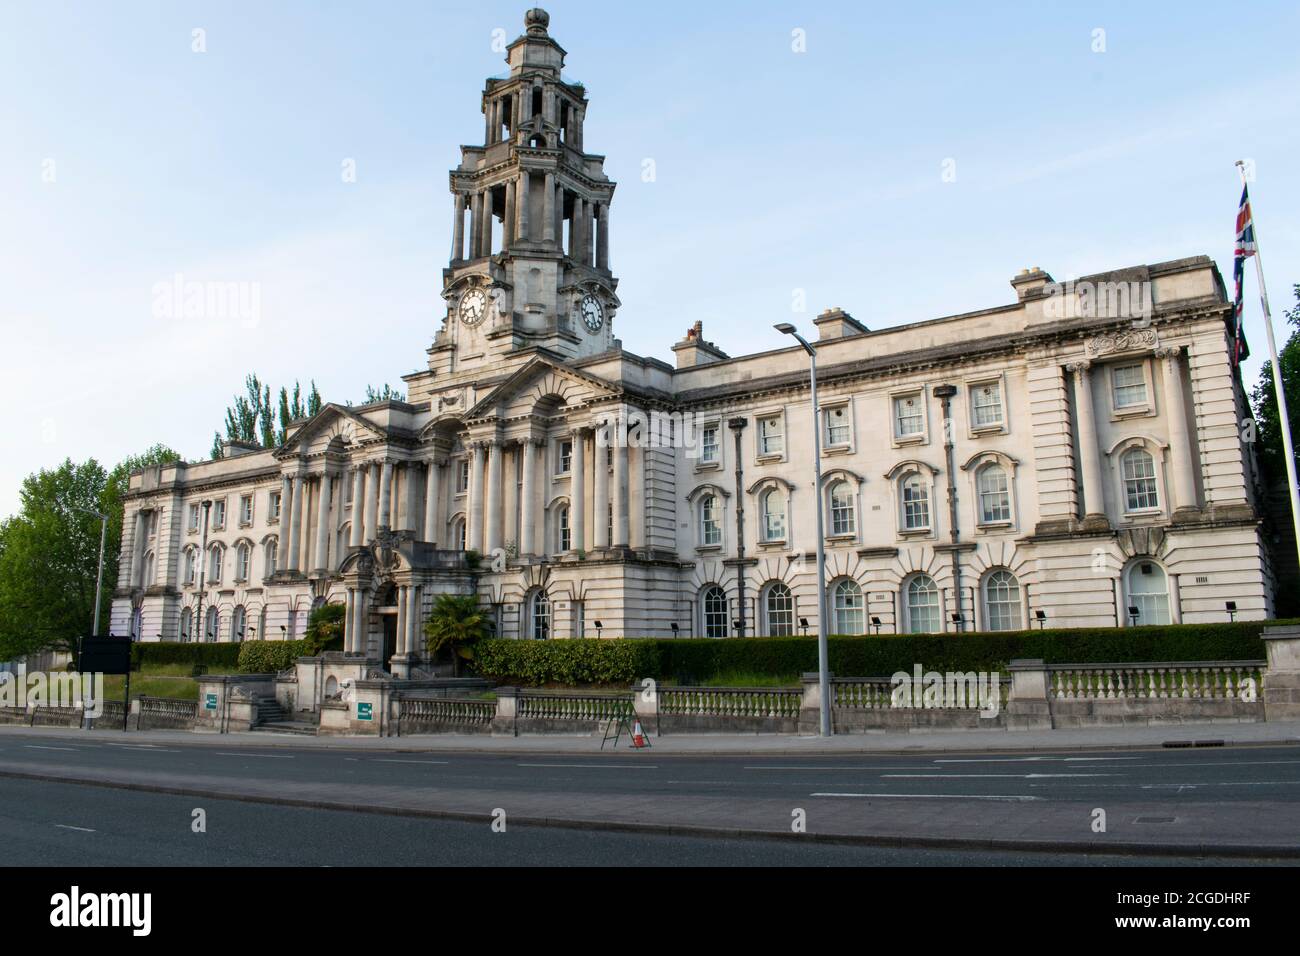 Stockport Town Hall, Greater Manchester, UK. Baroque wedding cake building. Stock Photo